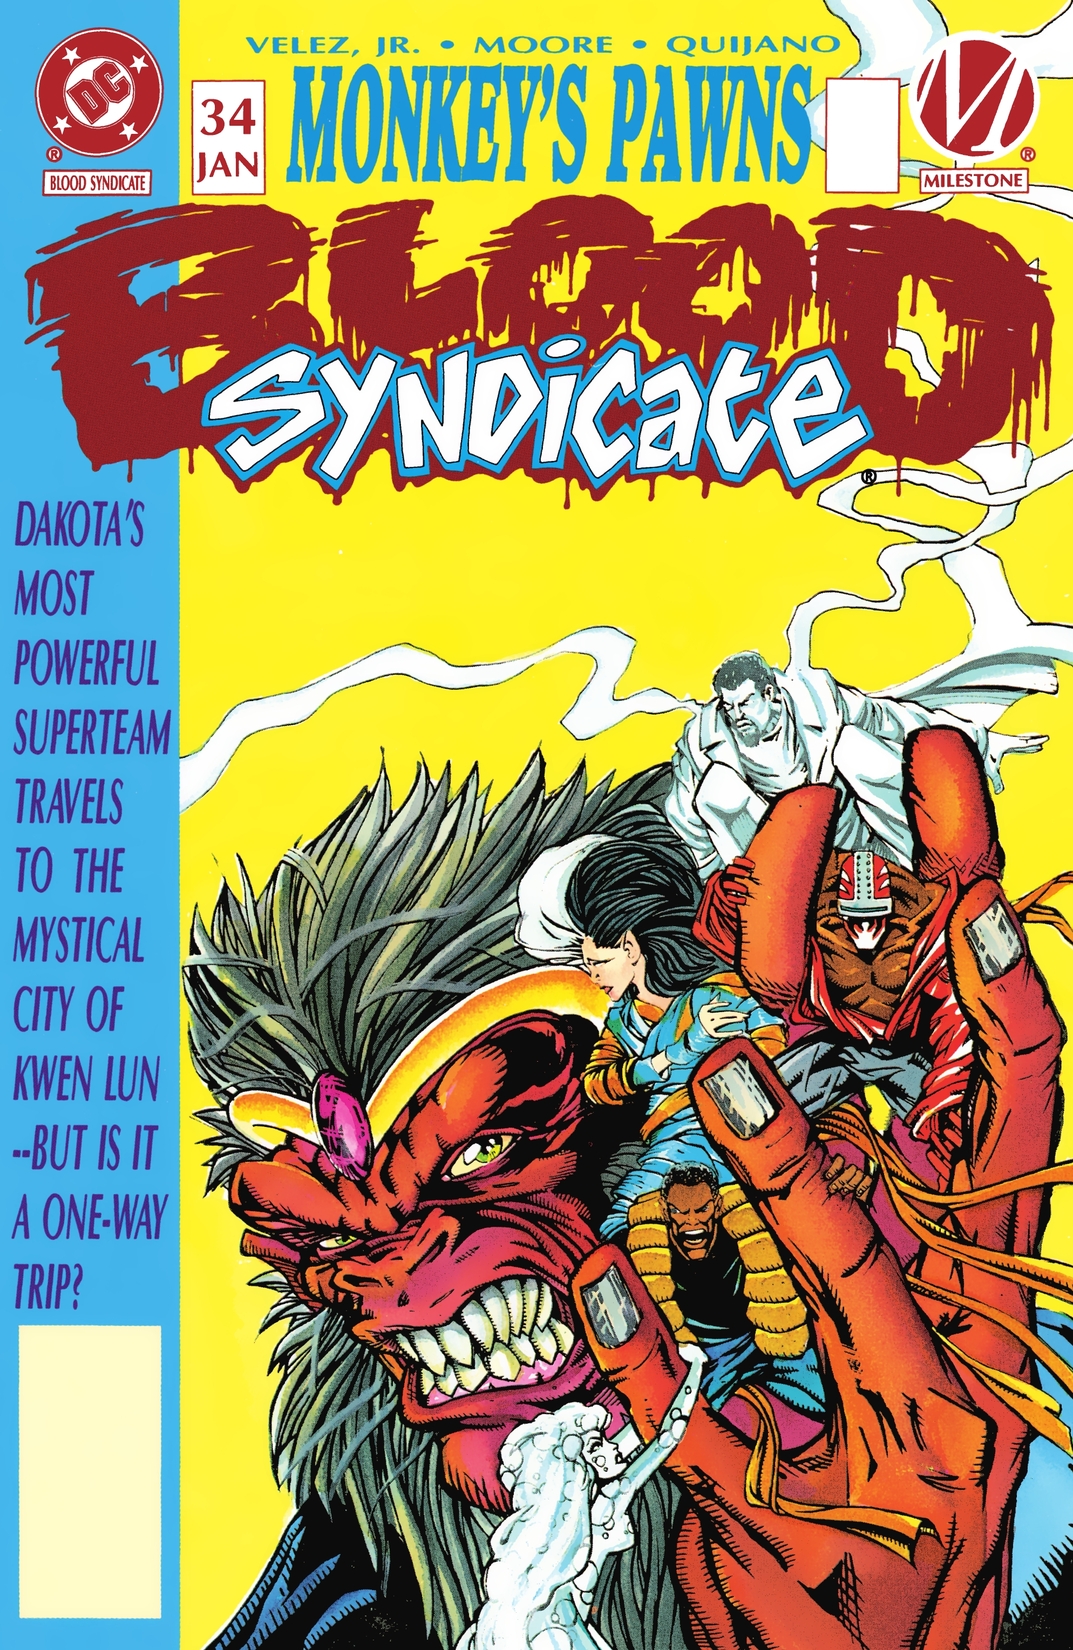 Blood Syndicate #34 preview images